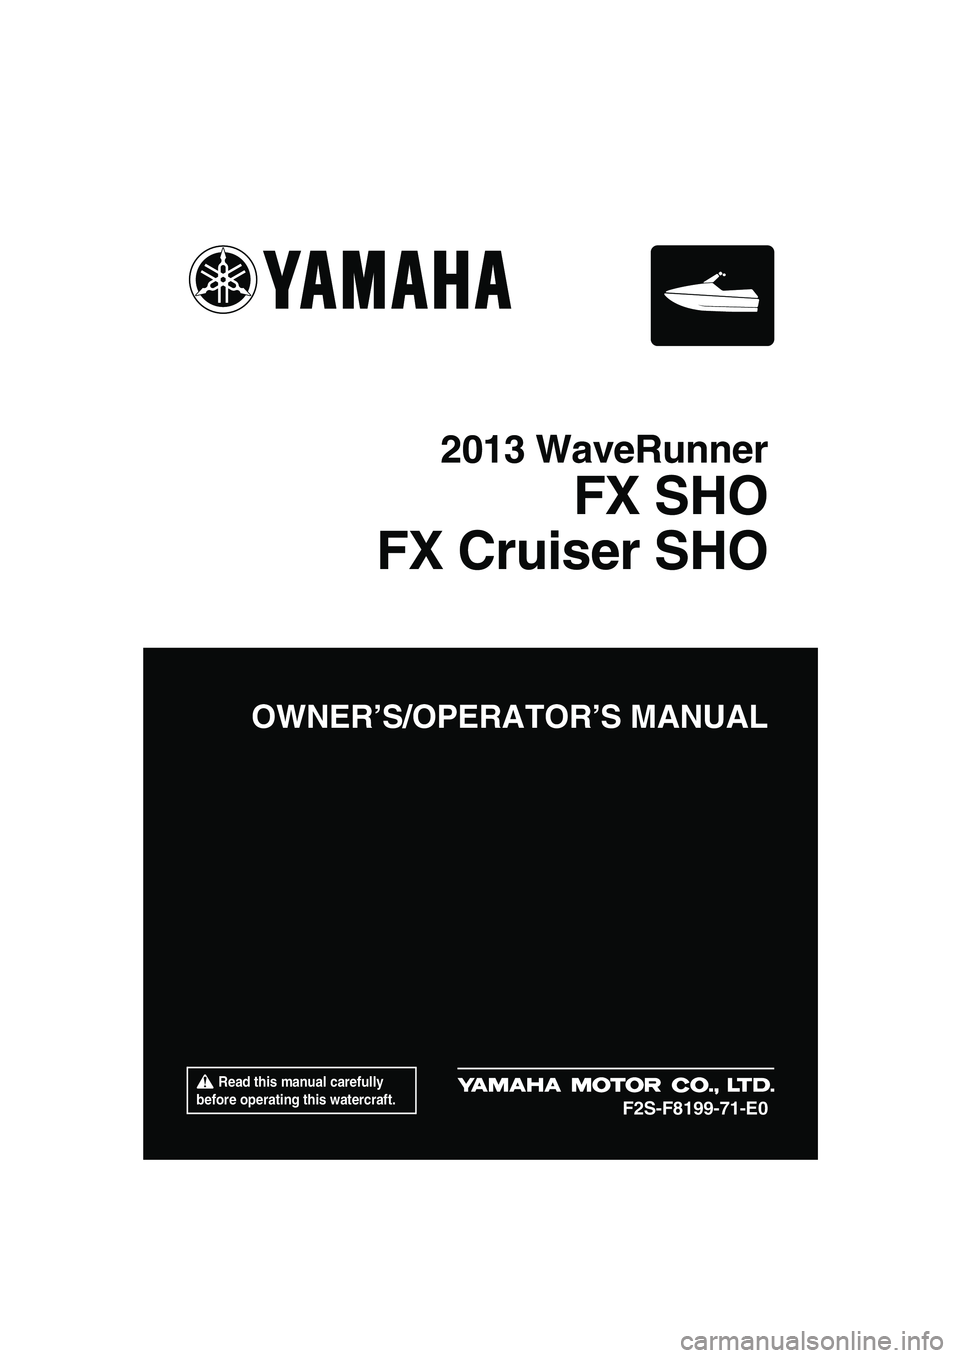 YAMAHA FX HO 2013  Owners Manual  Read this manual carefully 
before operating this watercraft.
OWNER’S/OPERATOR’S MANUAL
2013 WaveRunner
FX SHO
FX Cruiser SHO
F2S-F8199-71-E0
UF2S71E0.book  Page 1  Tuesday, August 21, 2012  2:33